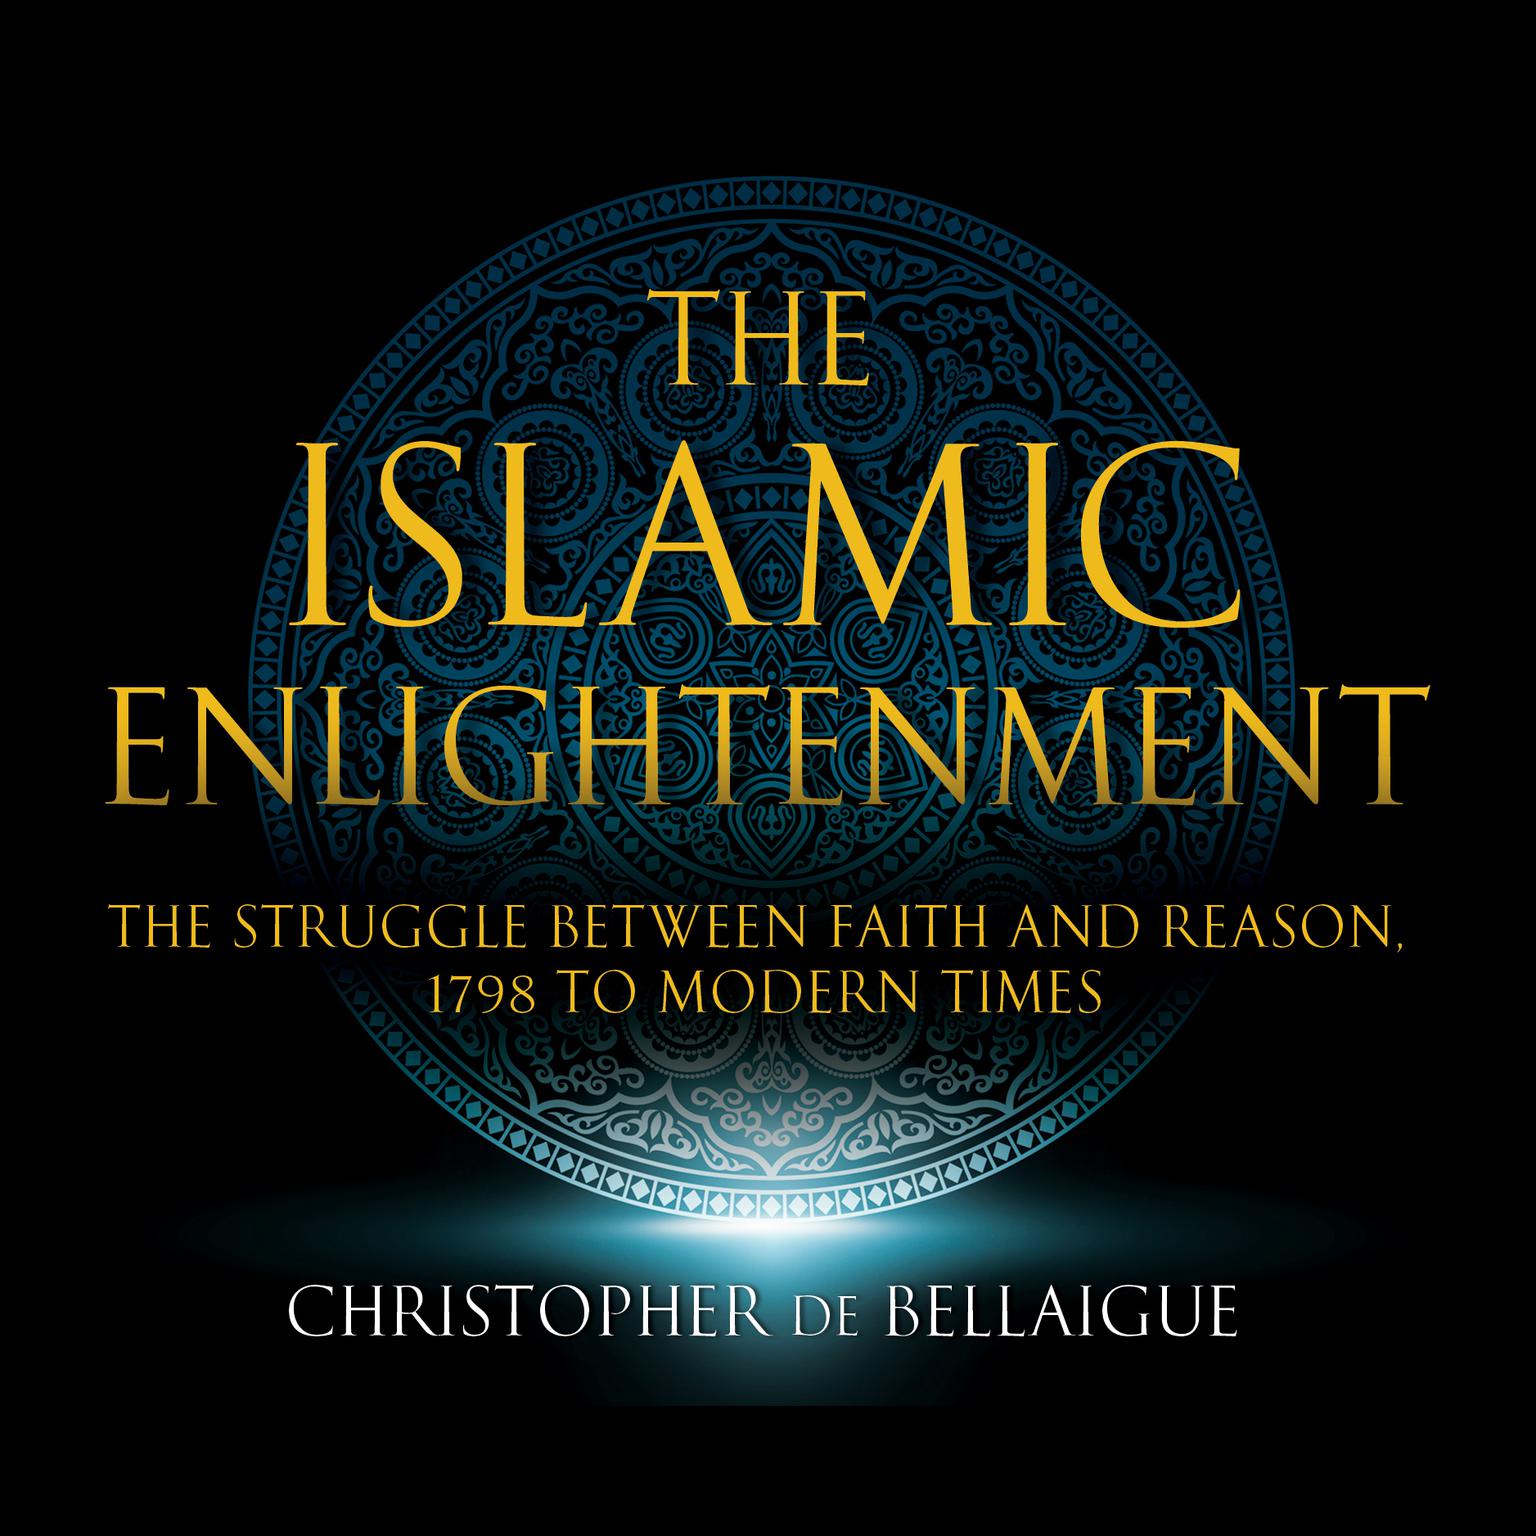 The Islamic Enlightenment: The Struggle between Faith and Reason: 1798 to Modern Times (First Edition) Audiobook, by Christopher de Bellaigue